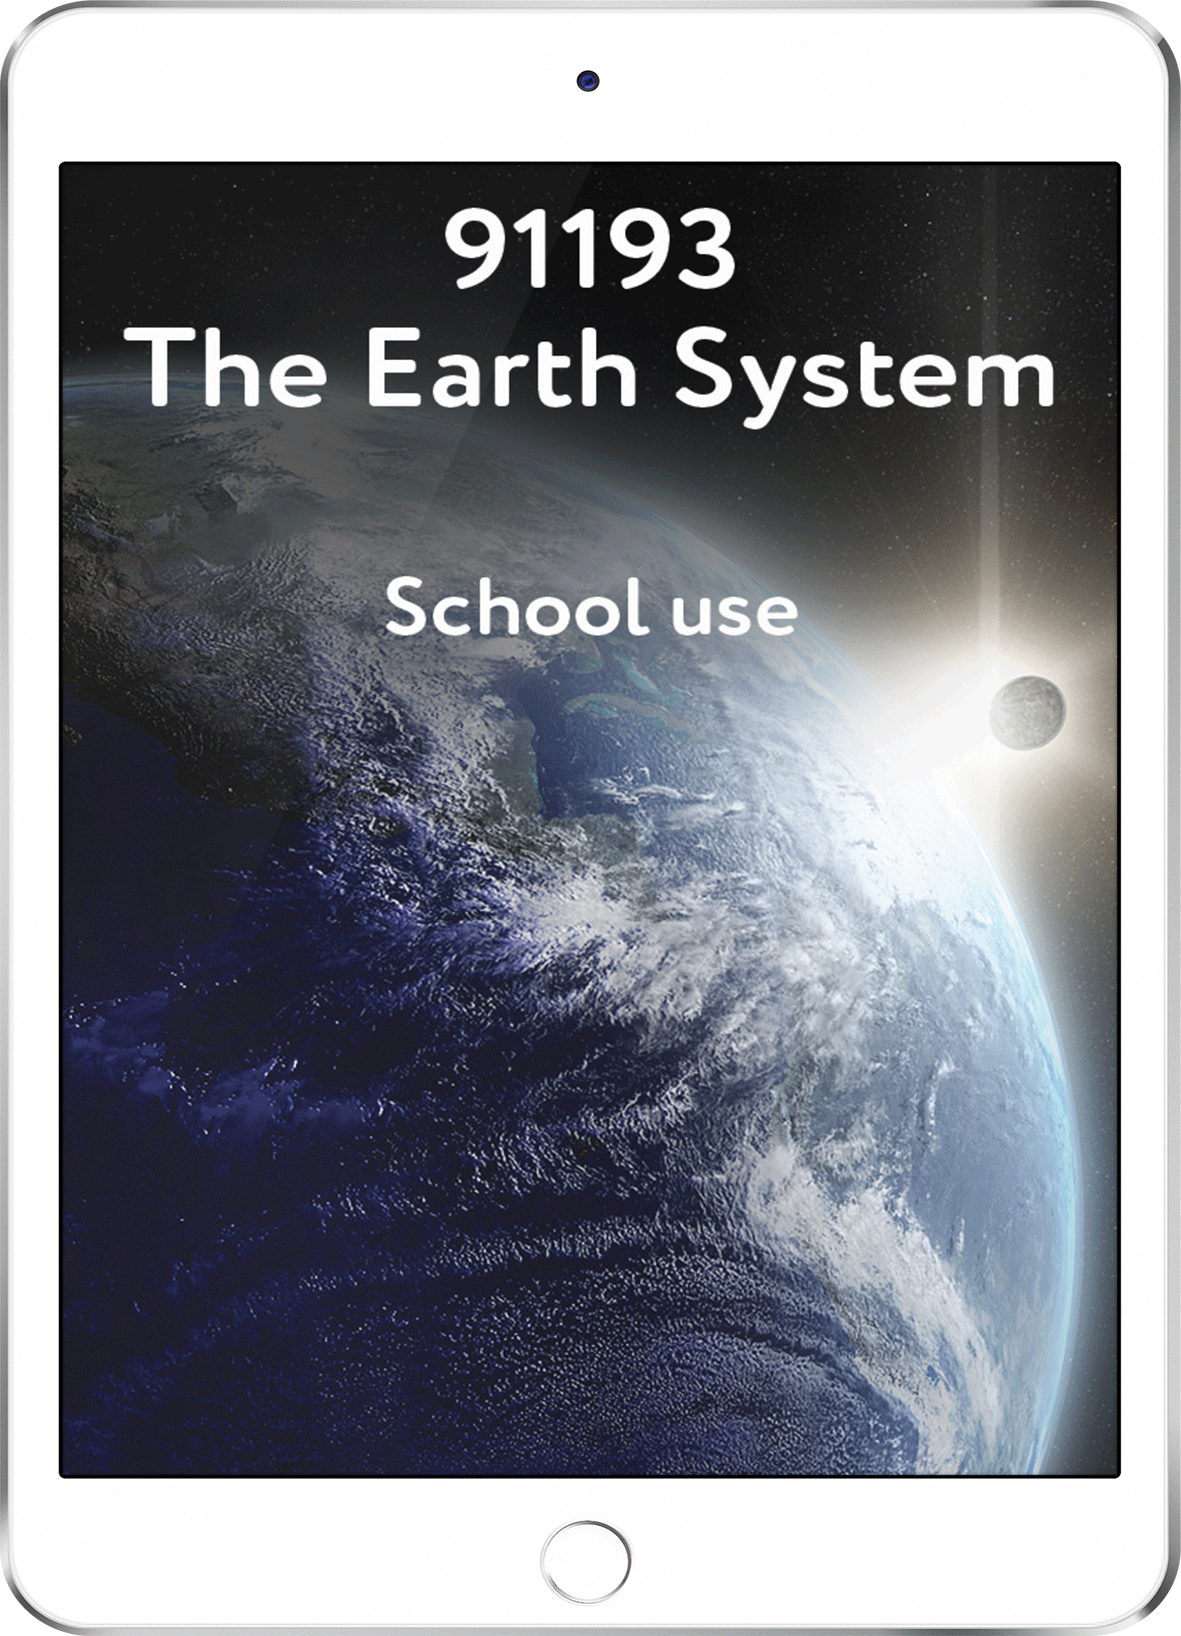 91193 The Earth System - School Use